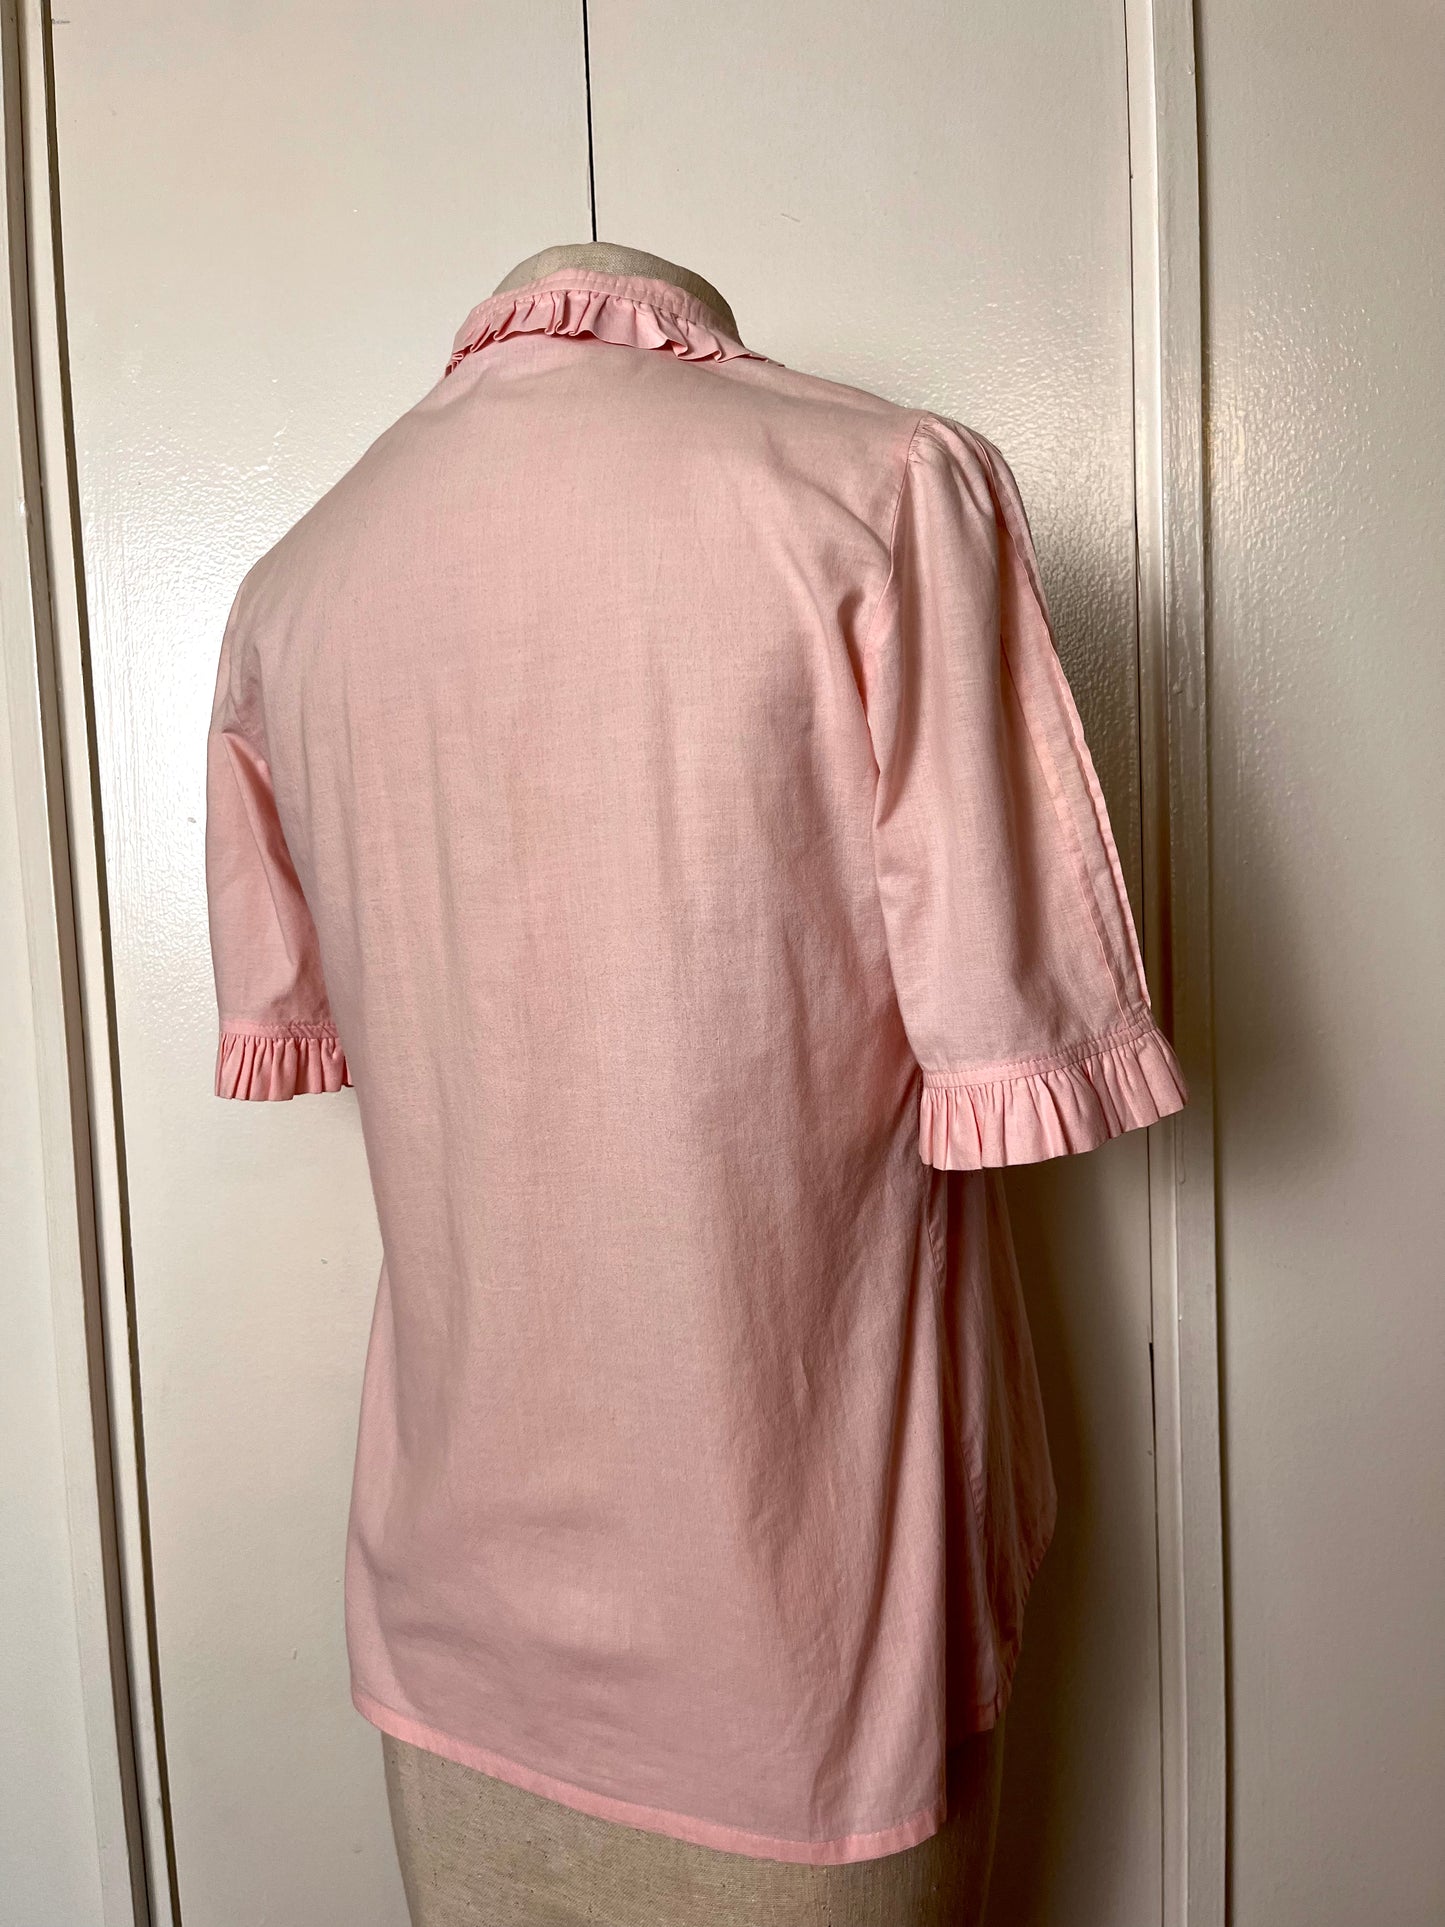 Vintage 1980's "Laura Ashley" Collared Light Pink Blouse